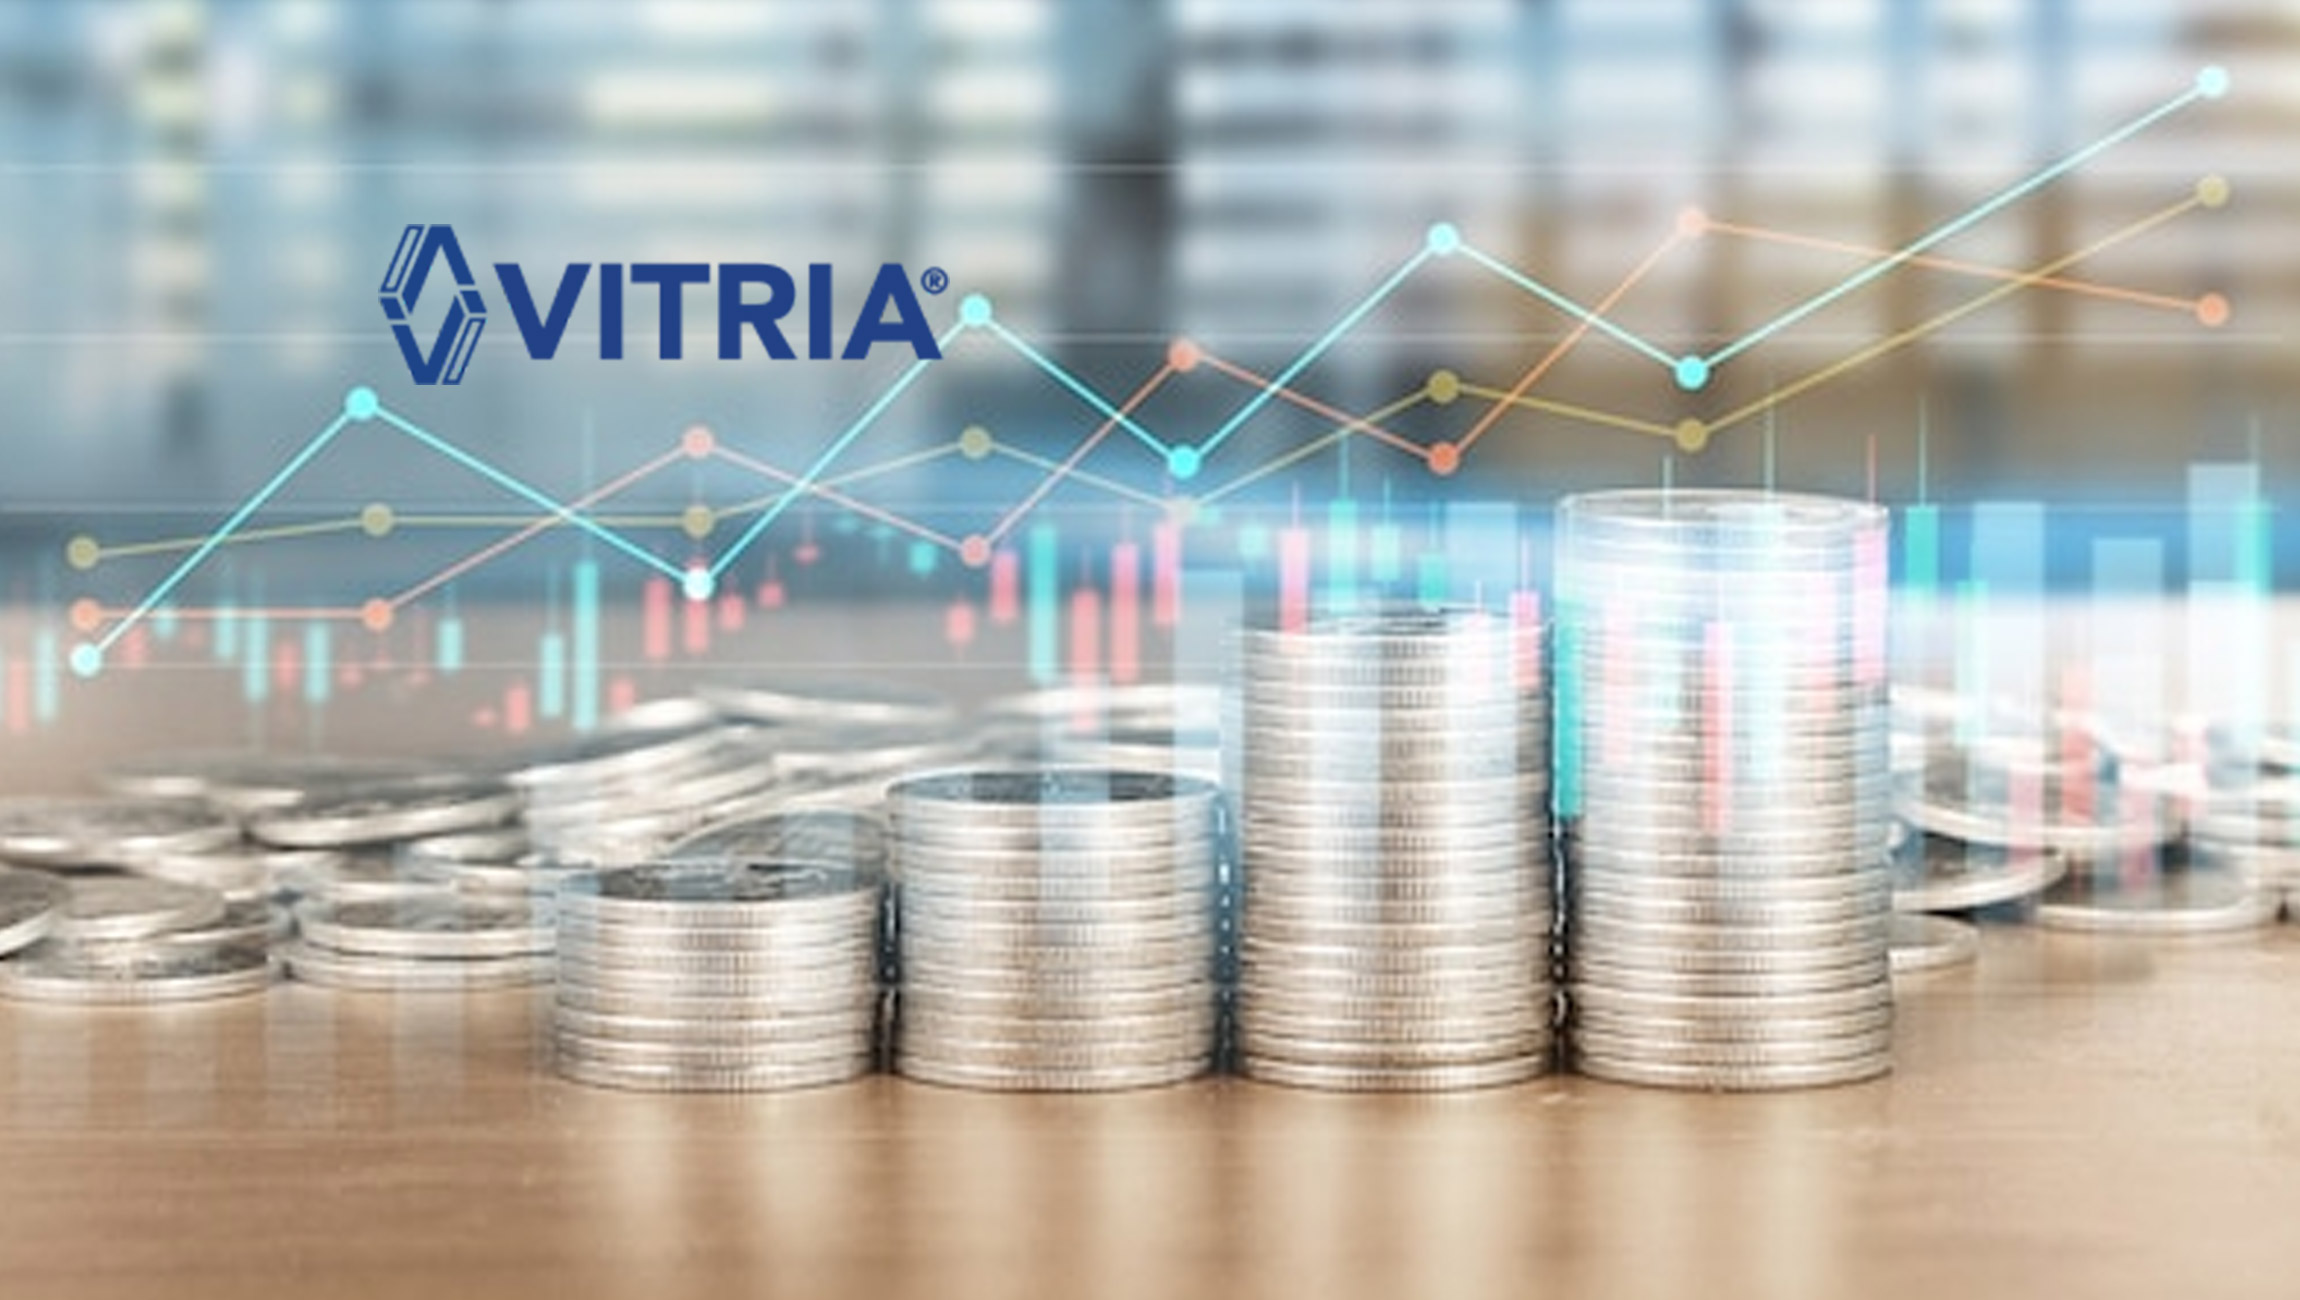 Vitria Announces Record Revenue and AIOps Product Growth